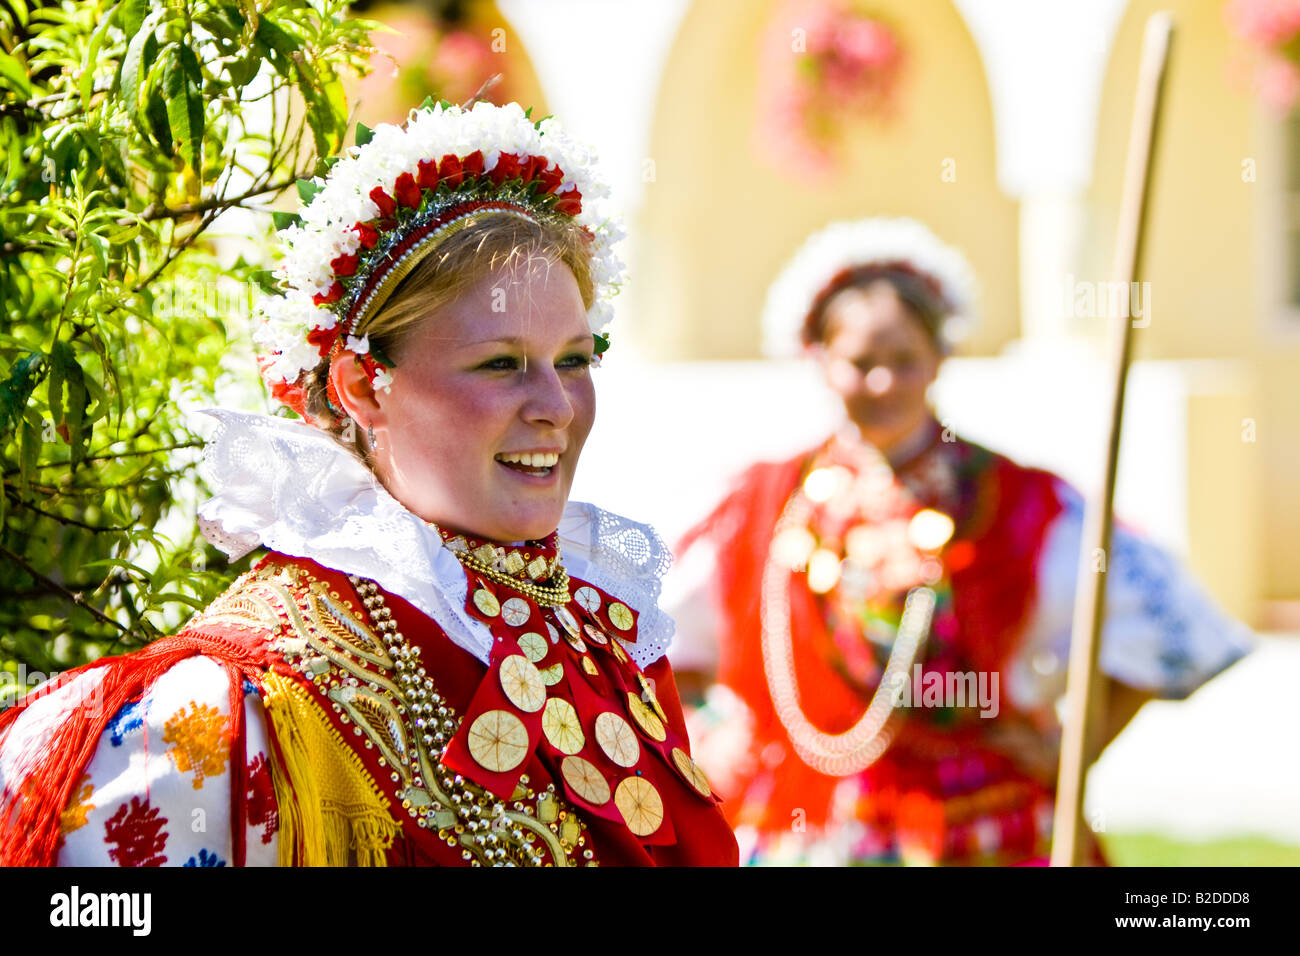 Girls in the Croatian traditional dress with ducats on the dress and headdress Stock Photo